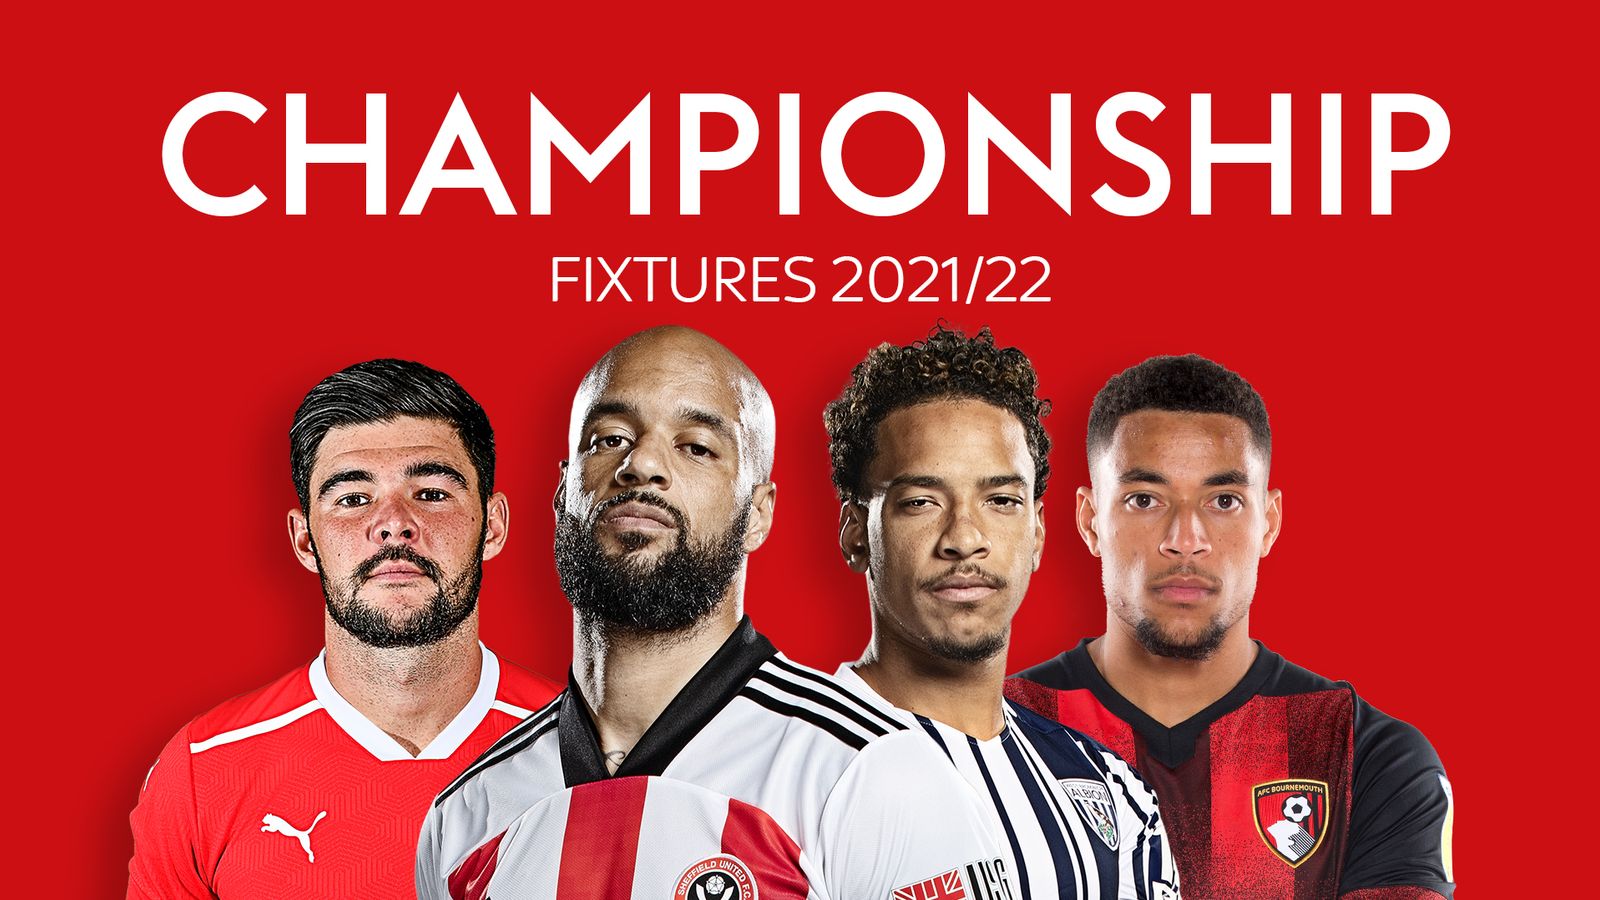 2021/22 Championship Betting Preview